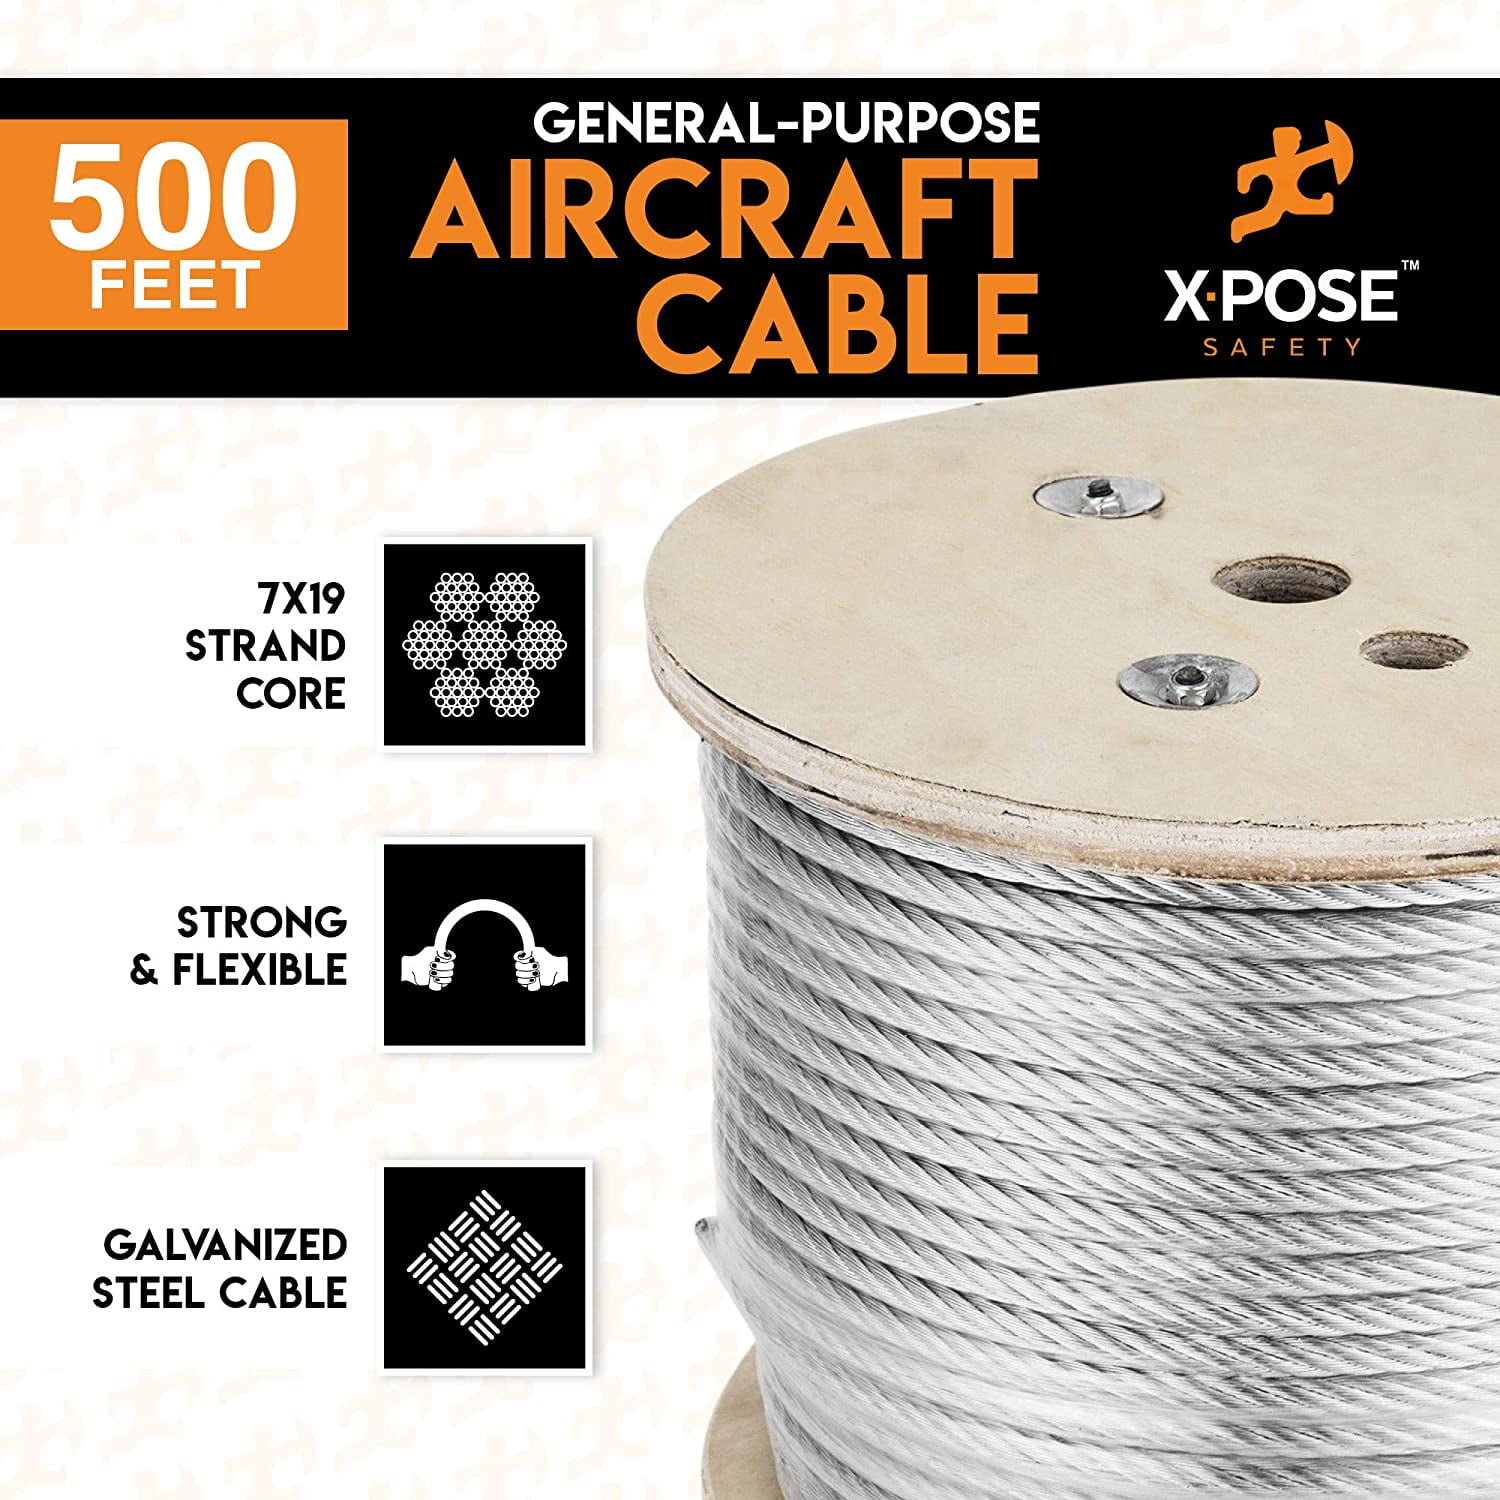 400 Feet 3/8" Galvanized Aircraft Cable Steel Wire Rope 7x19 